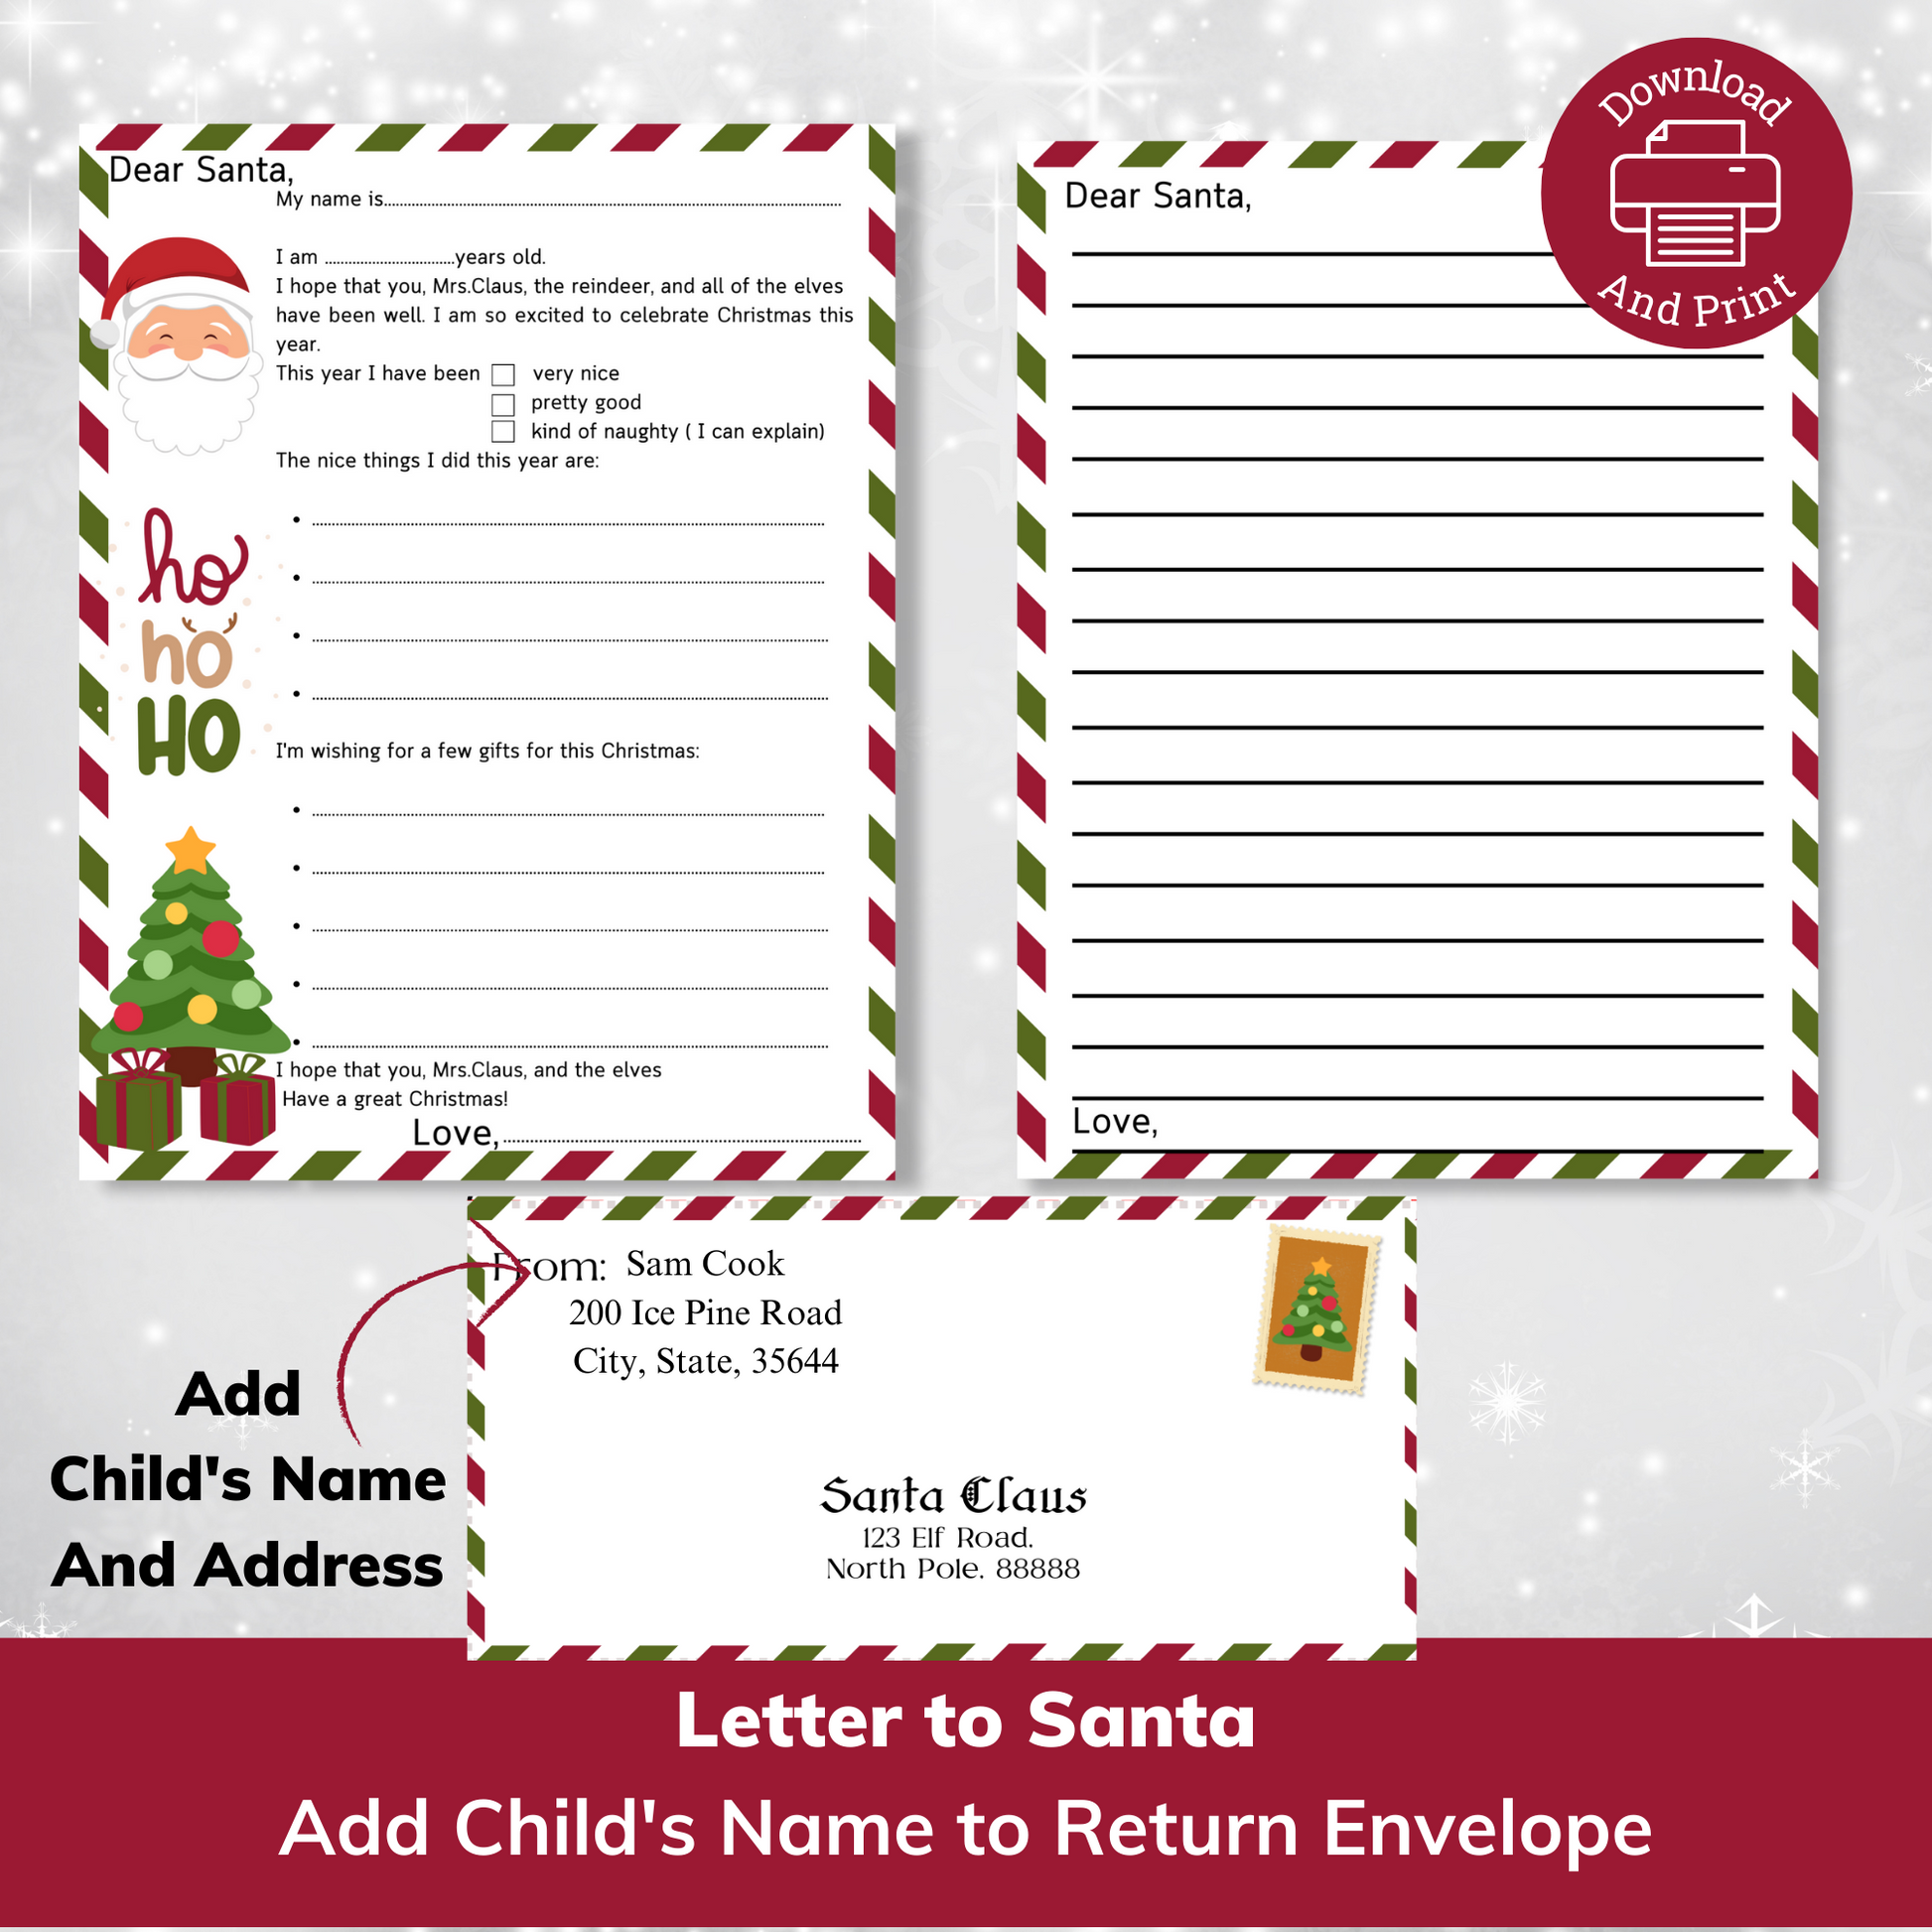 Letters for child to write a letter to santa. And an envelope to send letter back to santa